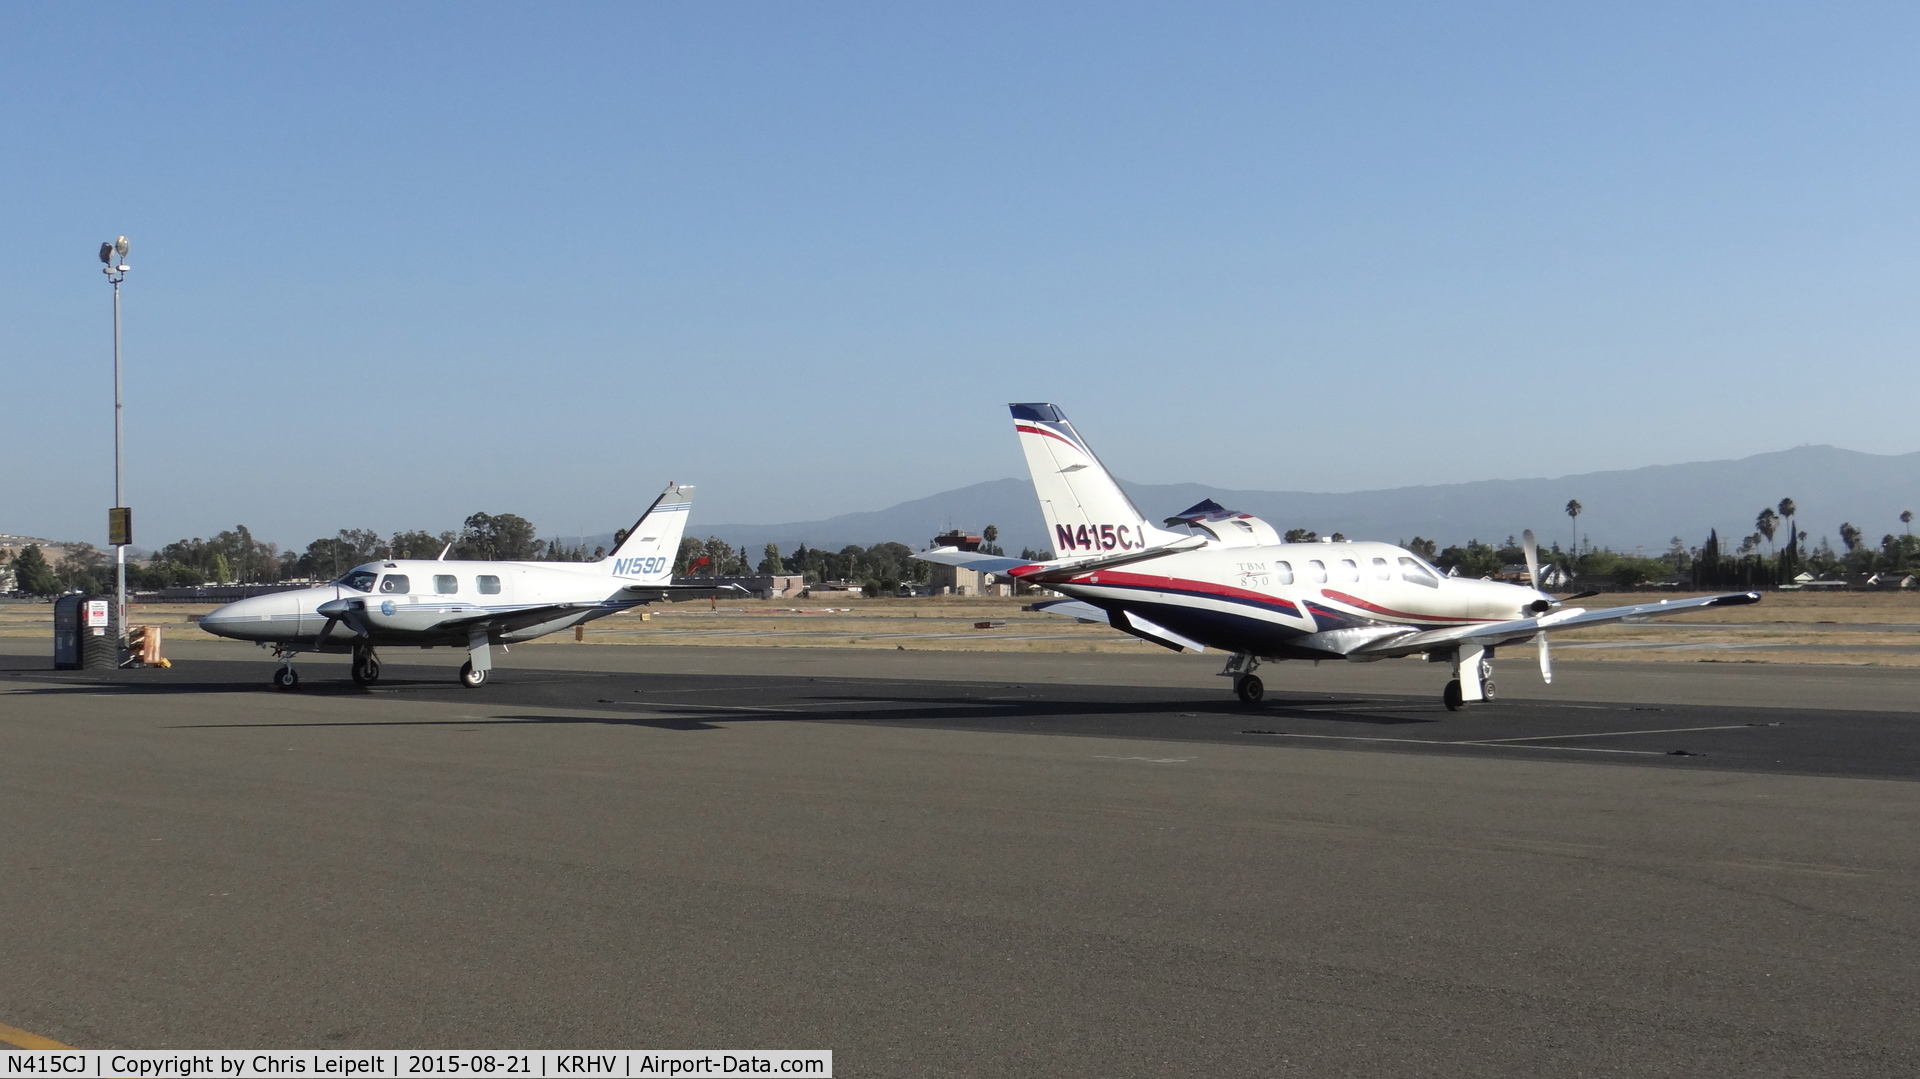 N415CJ, 2007 Socata TBM-700 C/N 415, Stratos Aviation LLC (Los Gatos, CA) 2007 Socata TBM-850 sitting next to a transient Piper Navajo at Reid Hillview Airport, San Jose, CA. Such a beautiful sight to see two rare planes next to each other!